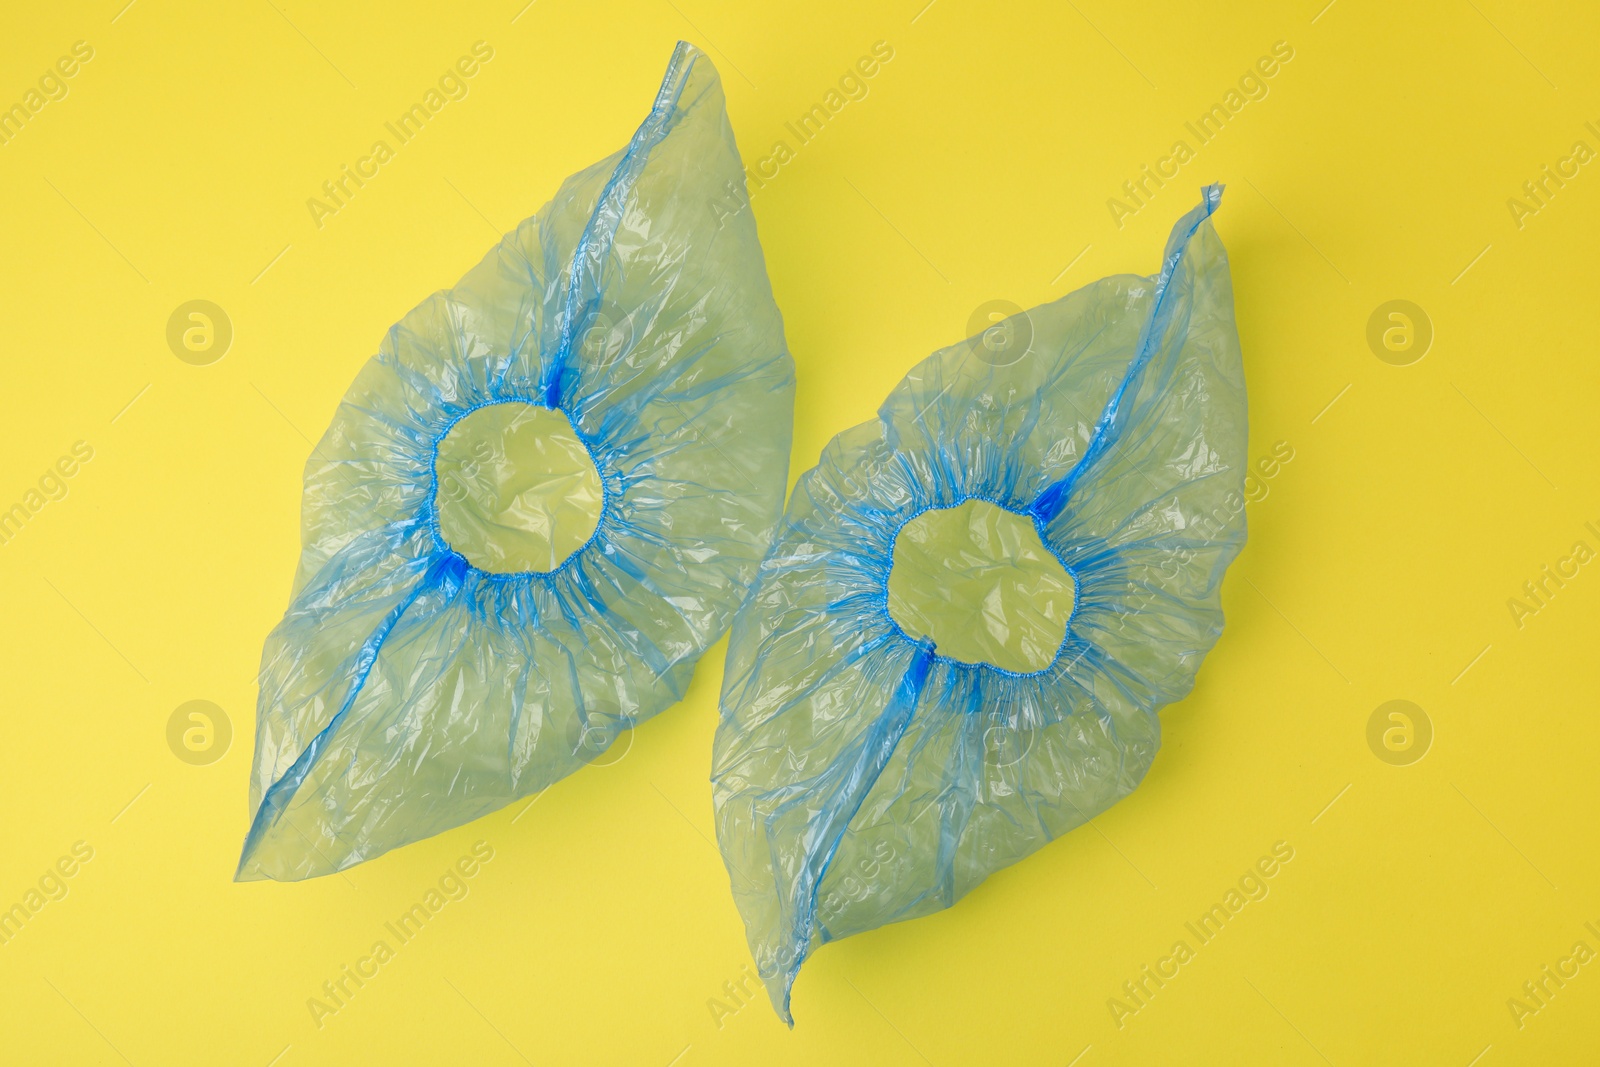 Photo of Pair of blue medical shoe covers on yellow background, top view